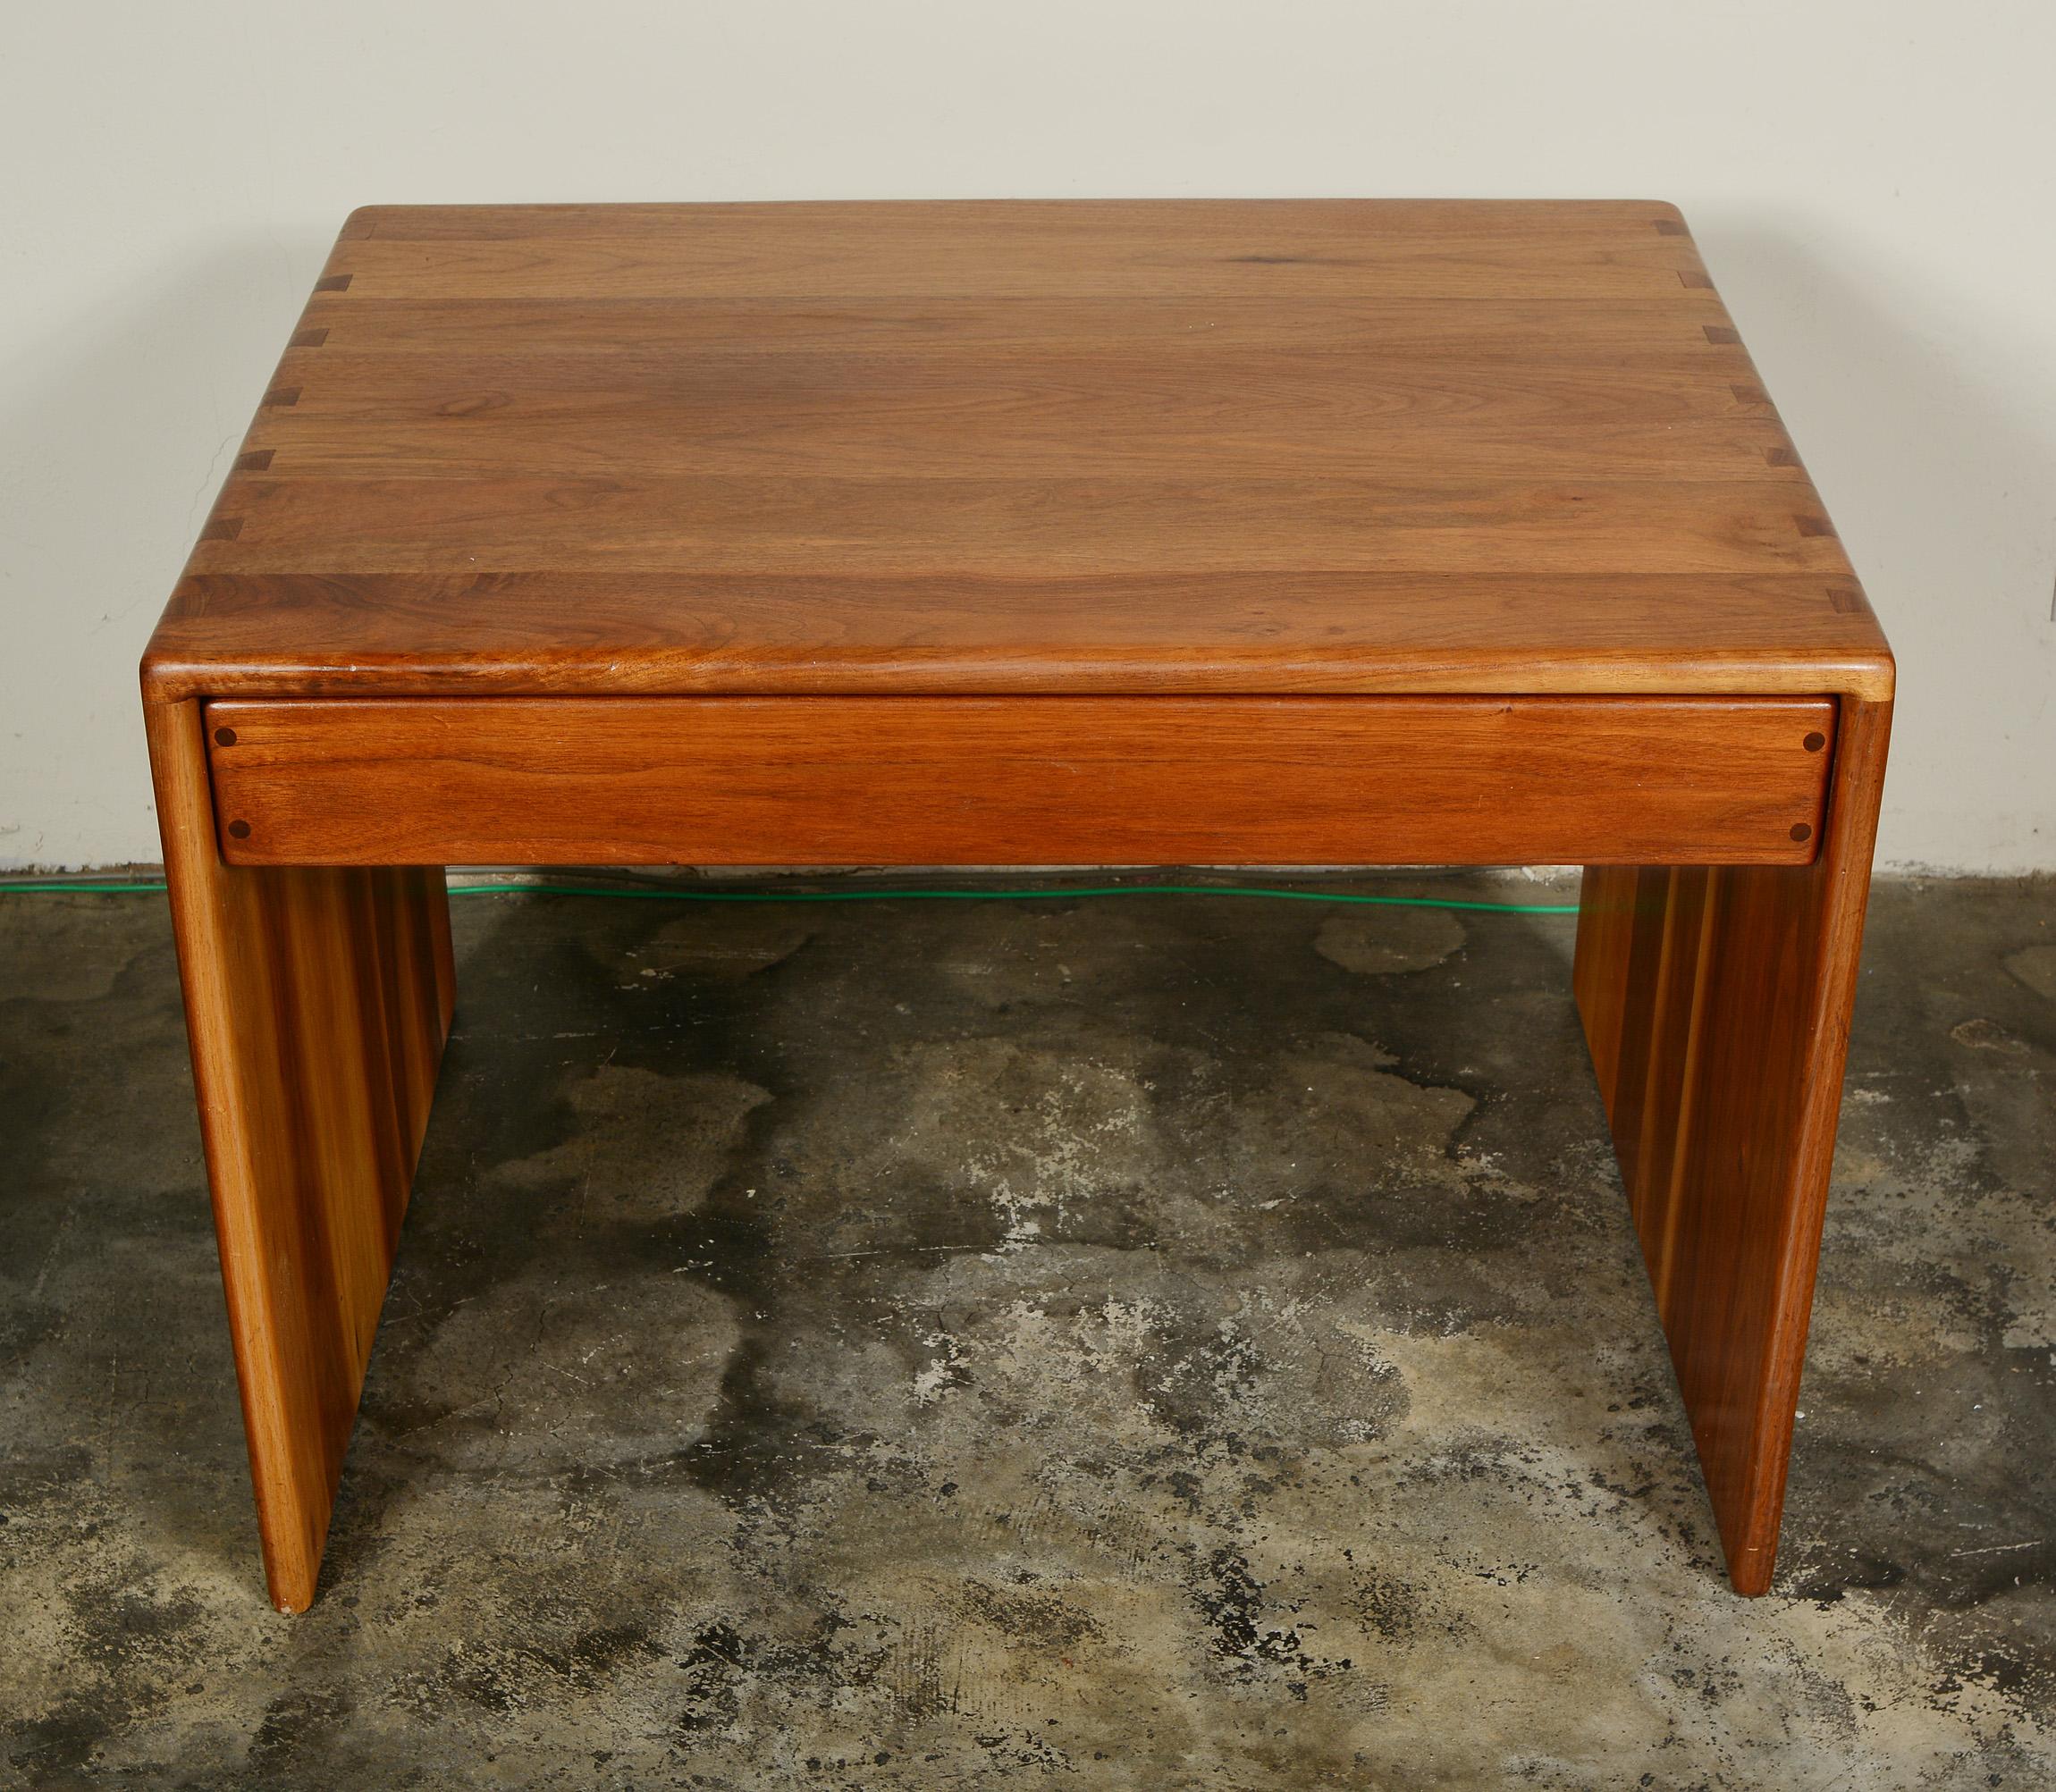 Side table in walnut by Arthur Espenet Carpenter, (1920-2006). This table has a single drawer below the top. The solid walnut sides and top are joined with dovetail joints. The runners for the drawer are visible on the back of the drawer and become